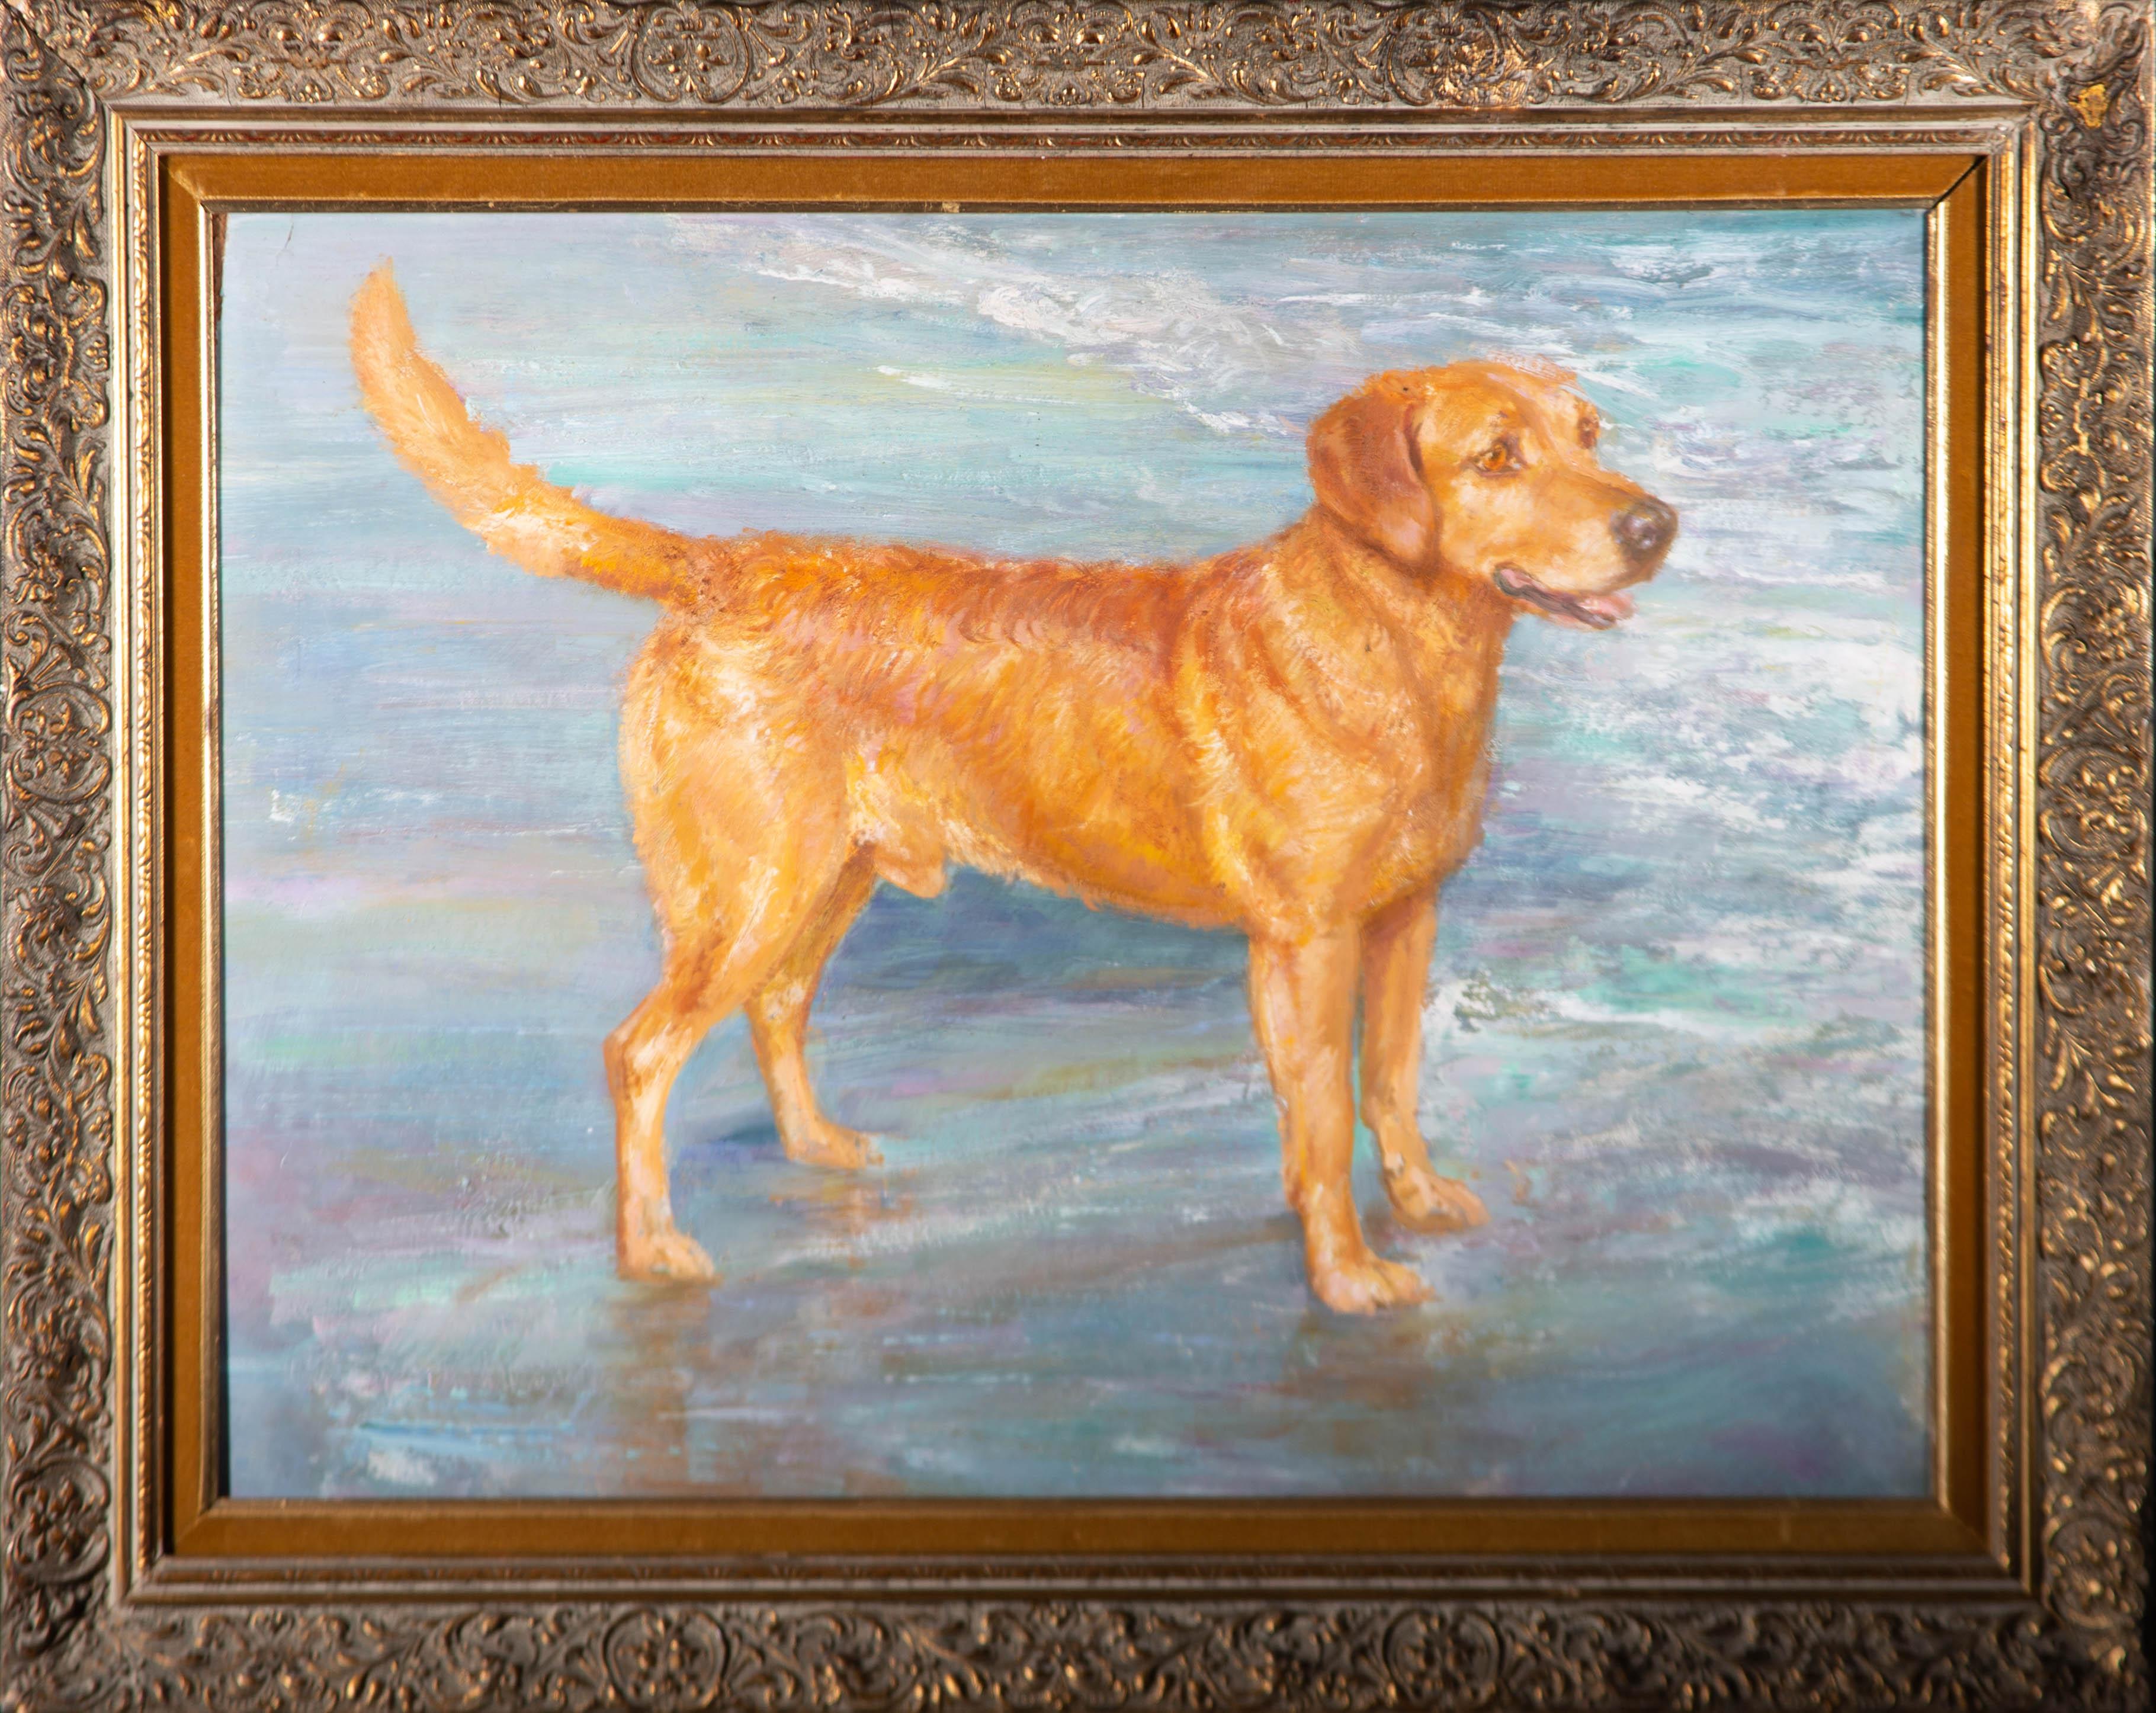 Unknown Animal Painting - 20th Century Oil - Beach Scene with Golden Retriever